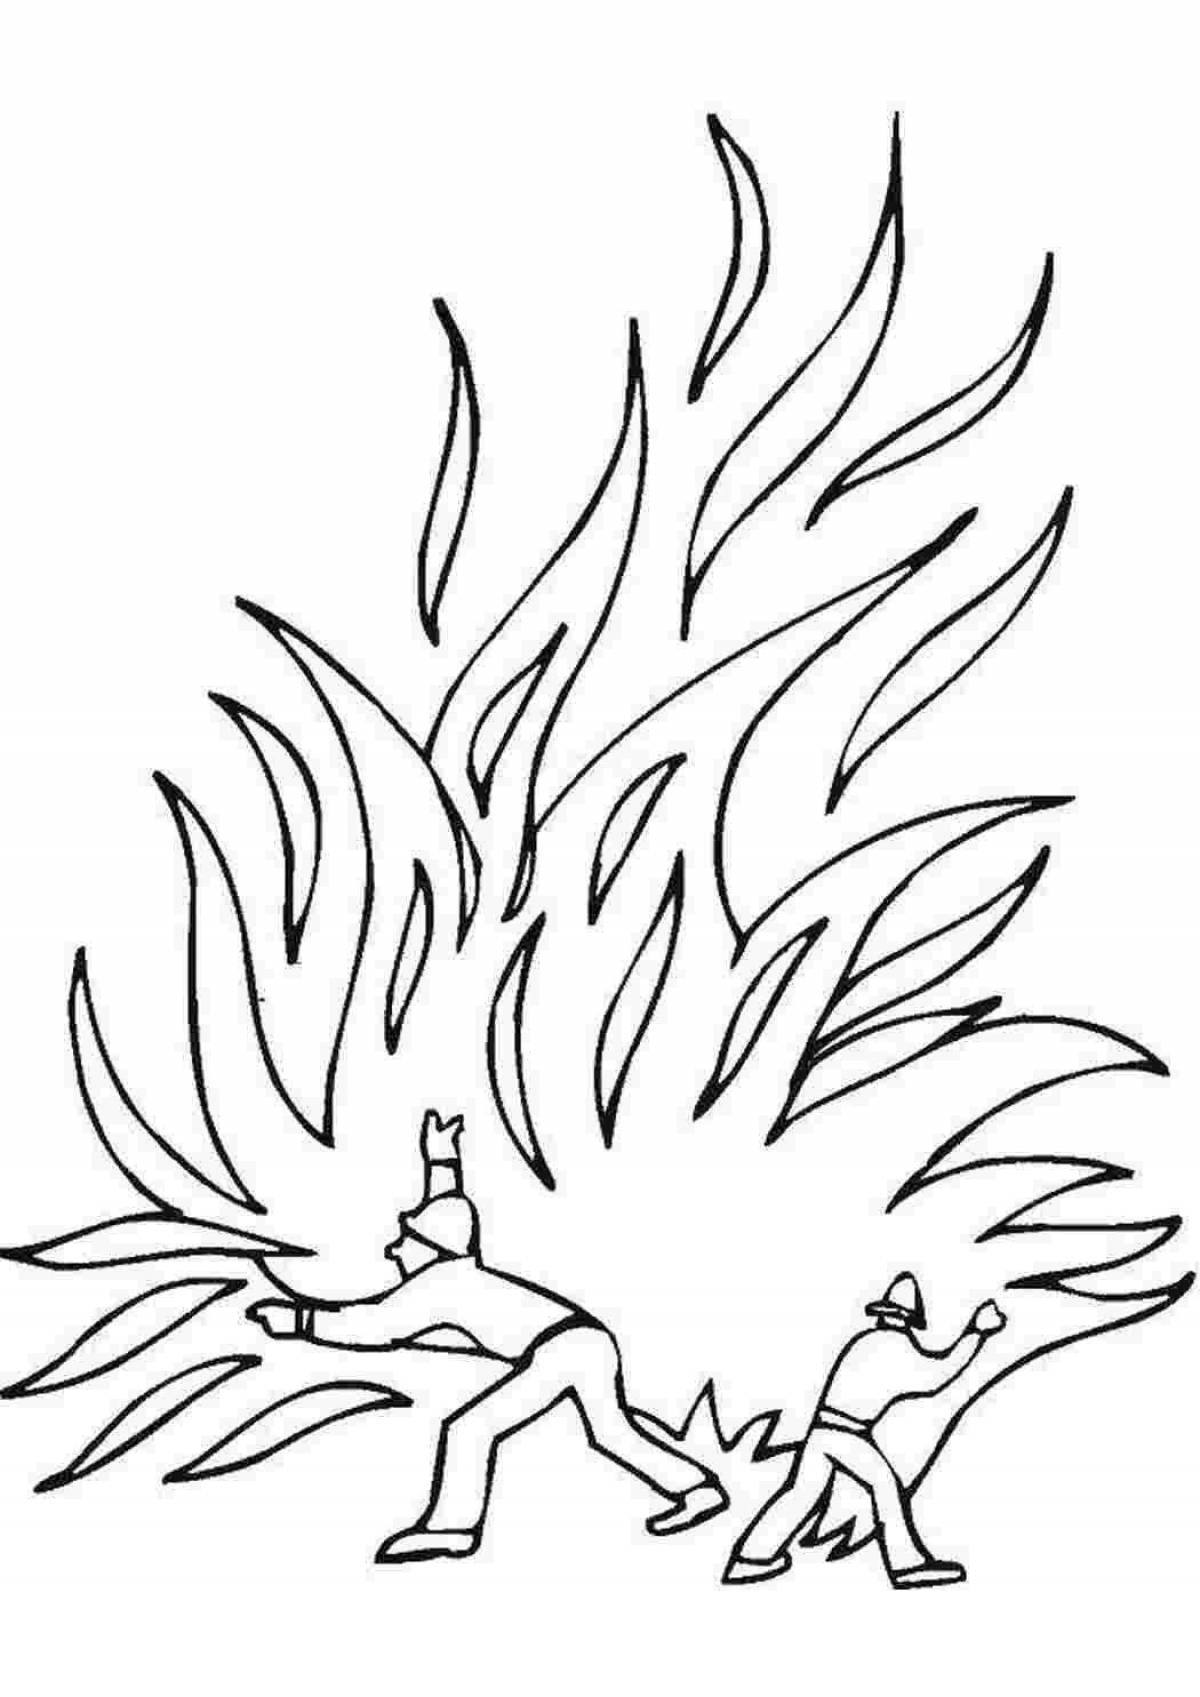 Coloring book blazing flames for kids